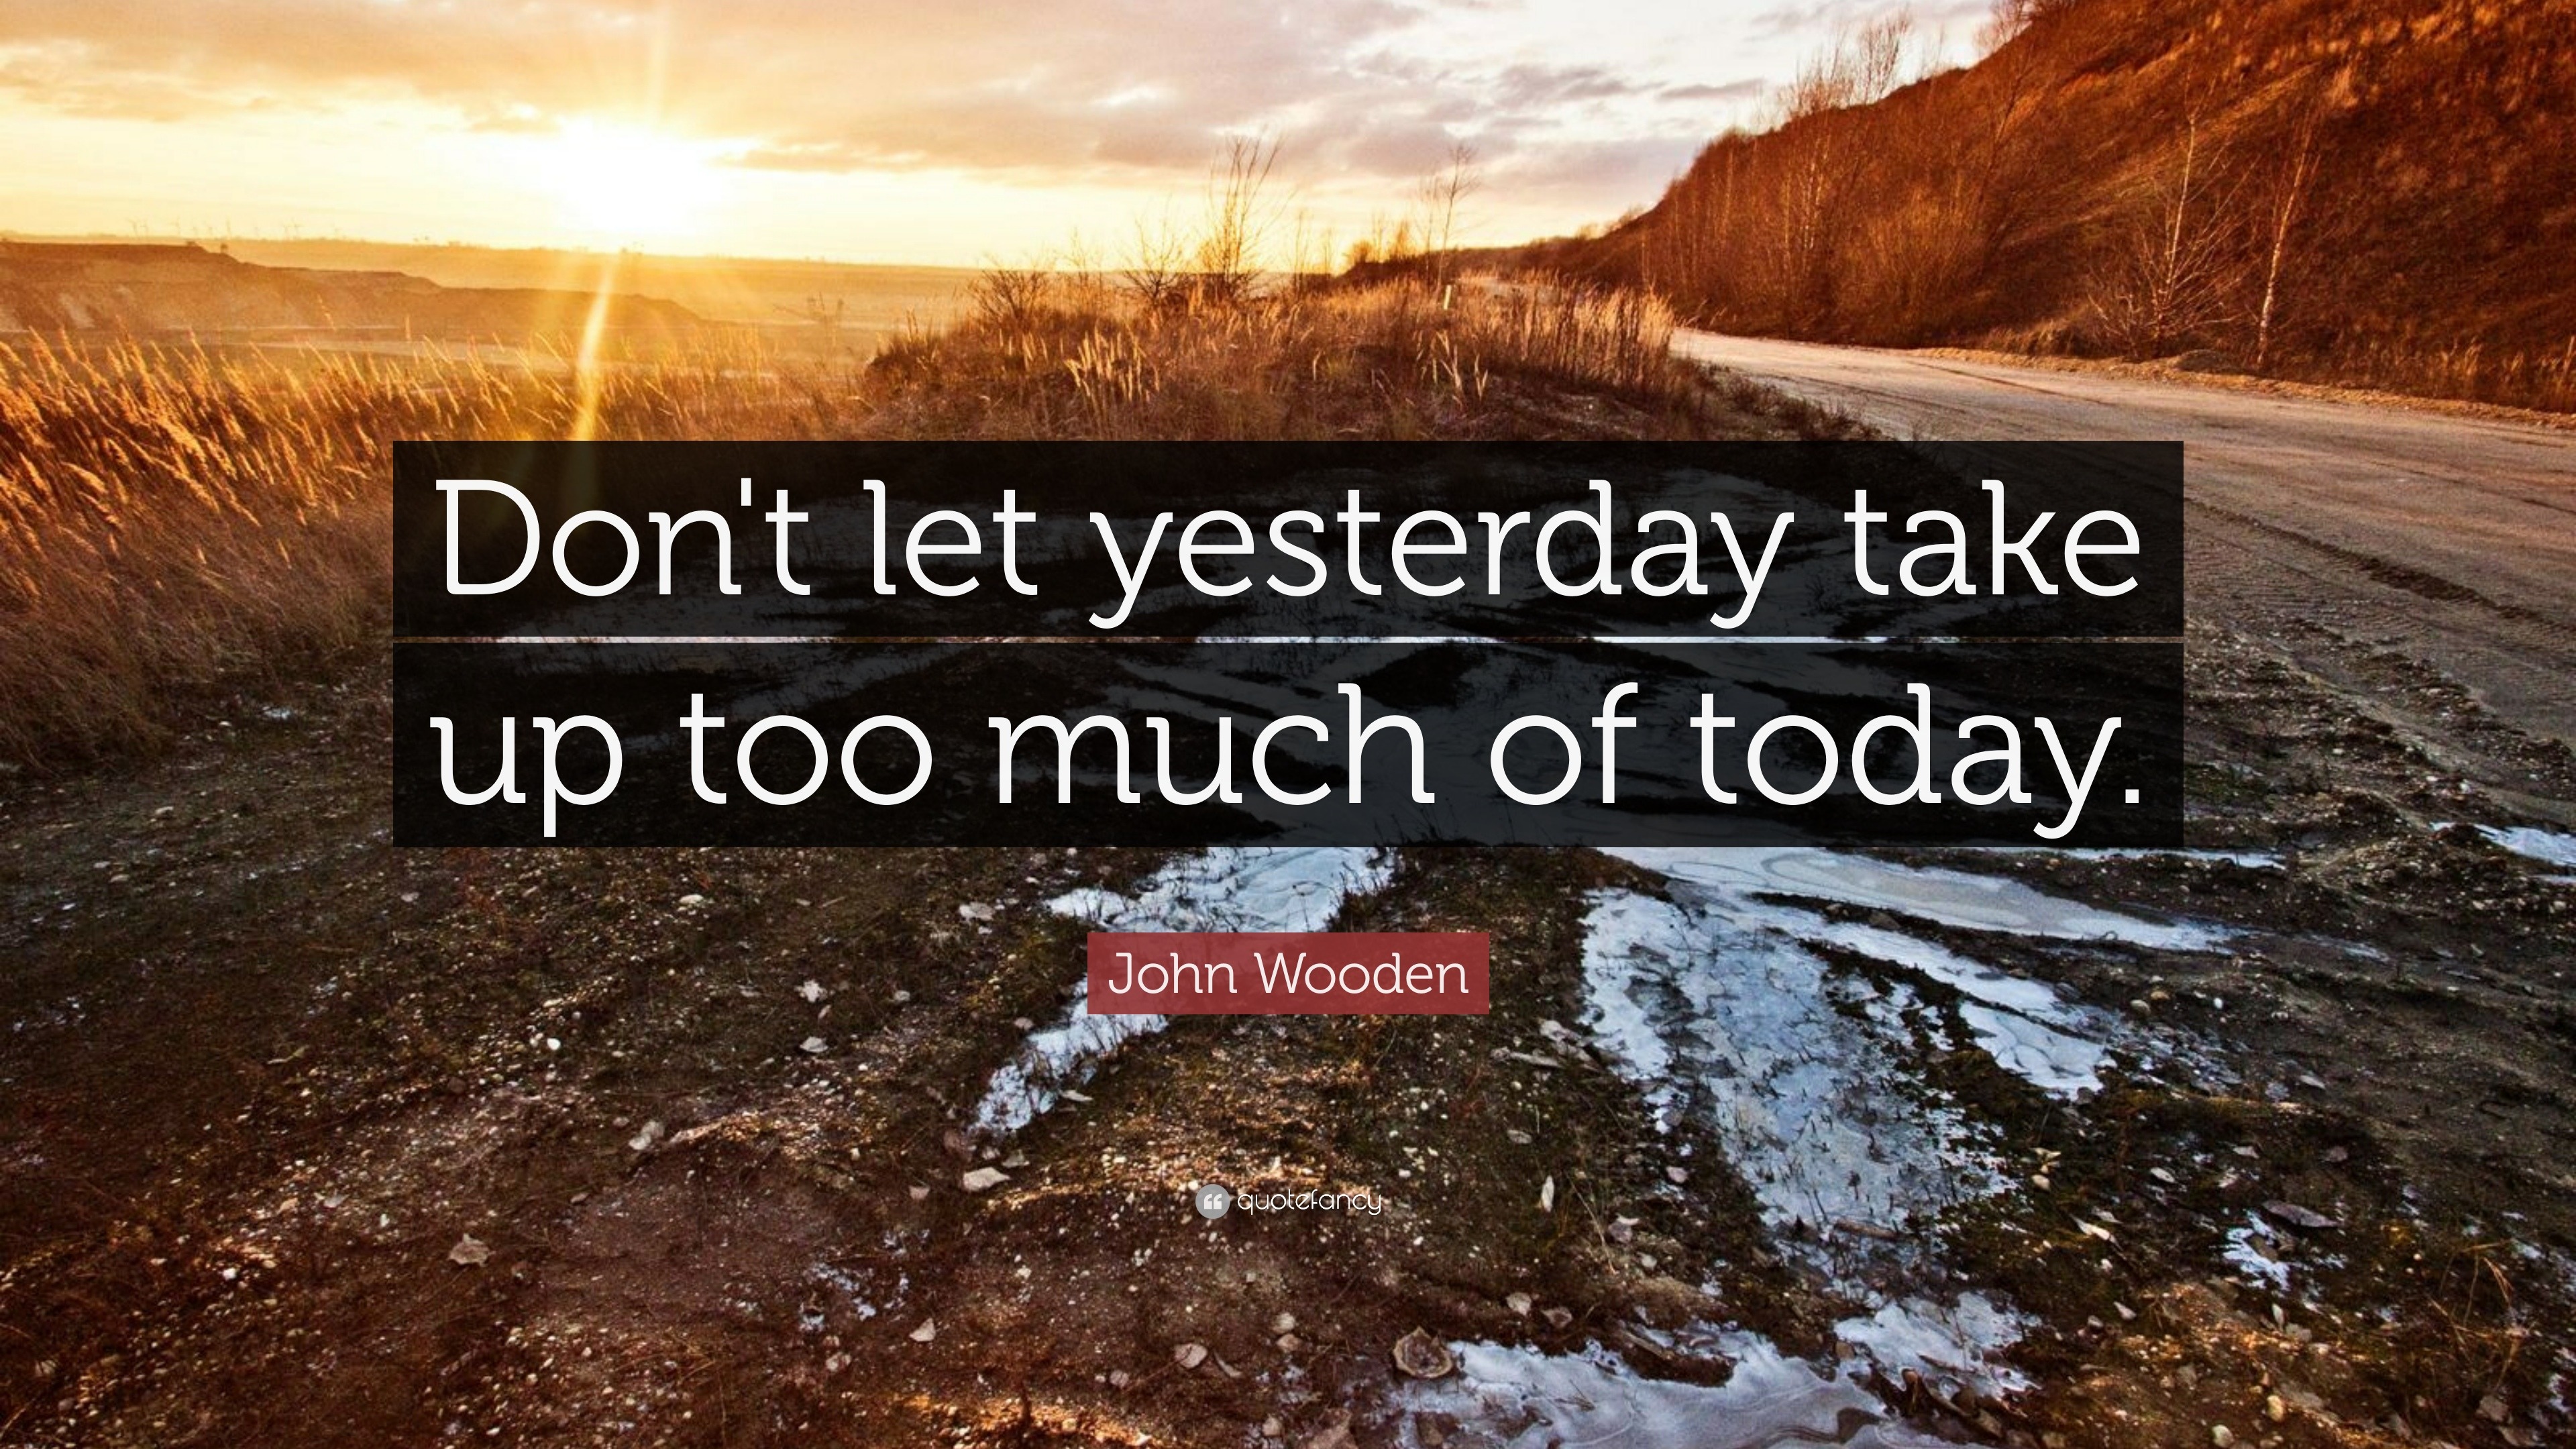 John Wooden Quote: “Don't let yesterday take up too much of today.”